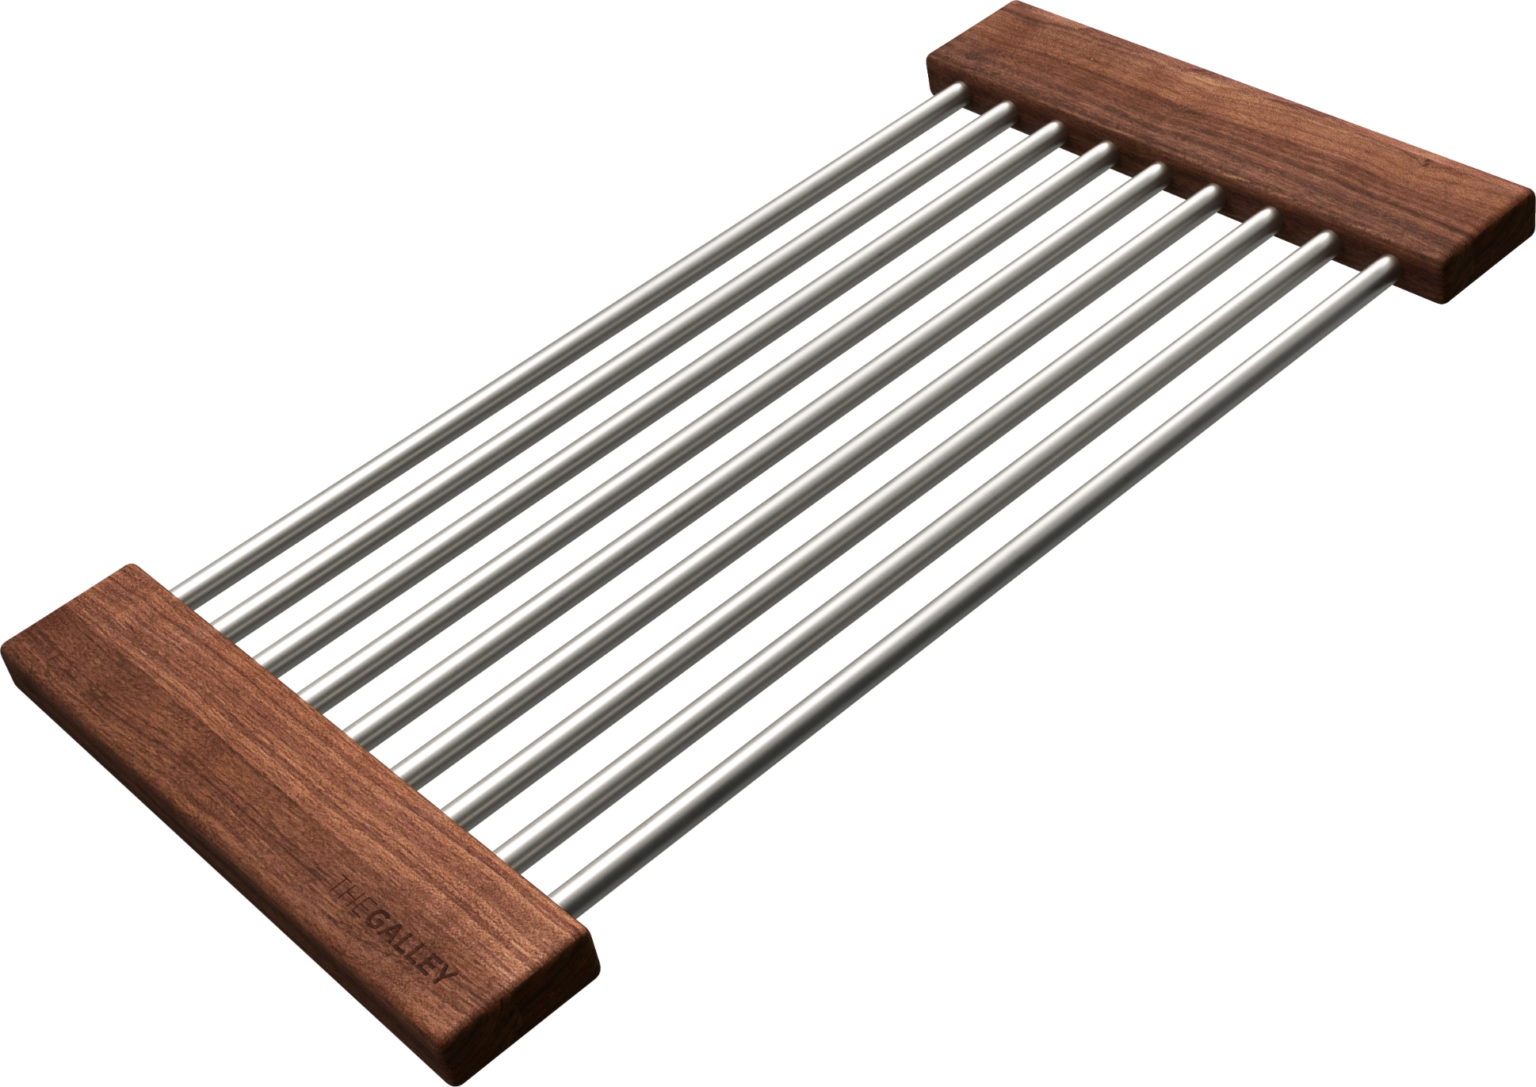 The Galley Upper Tier Drying Rack 9-1/4" x 18"